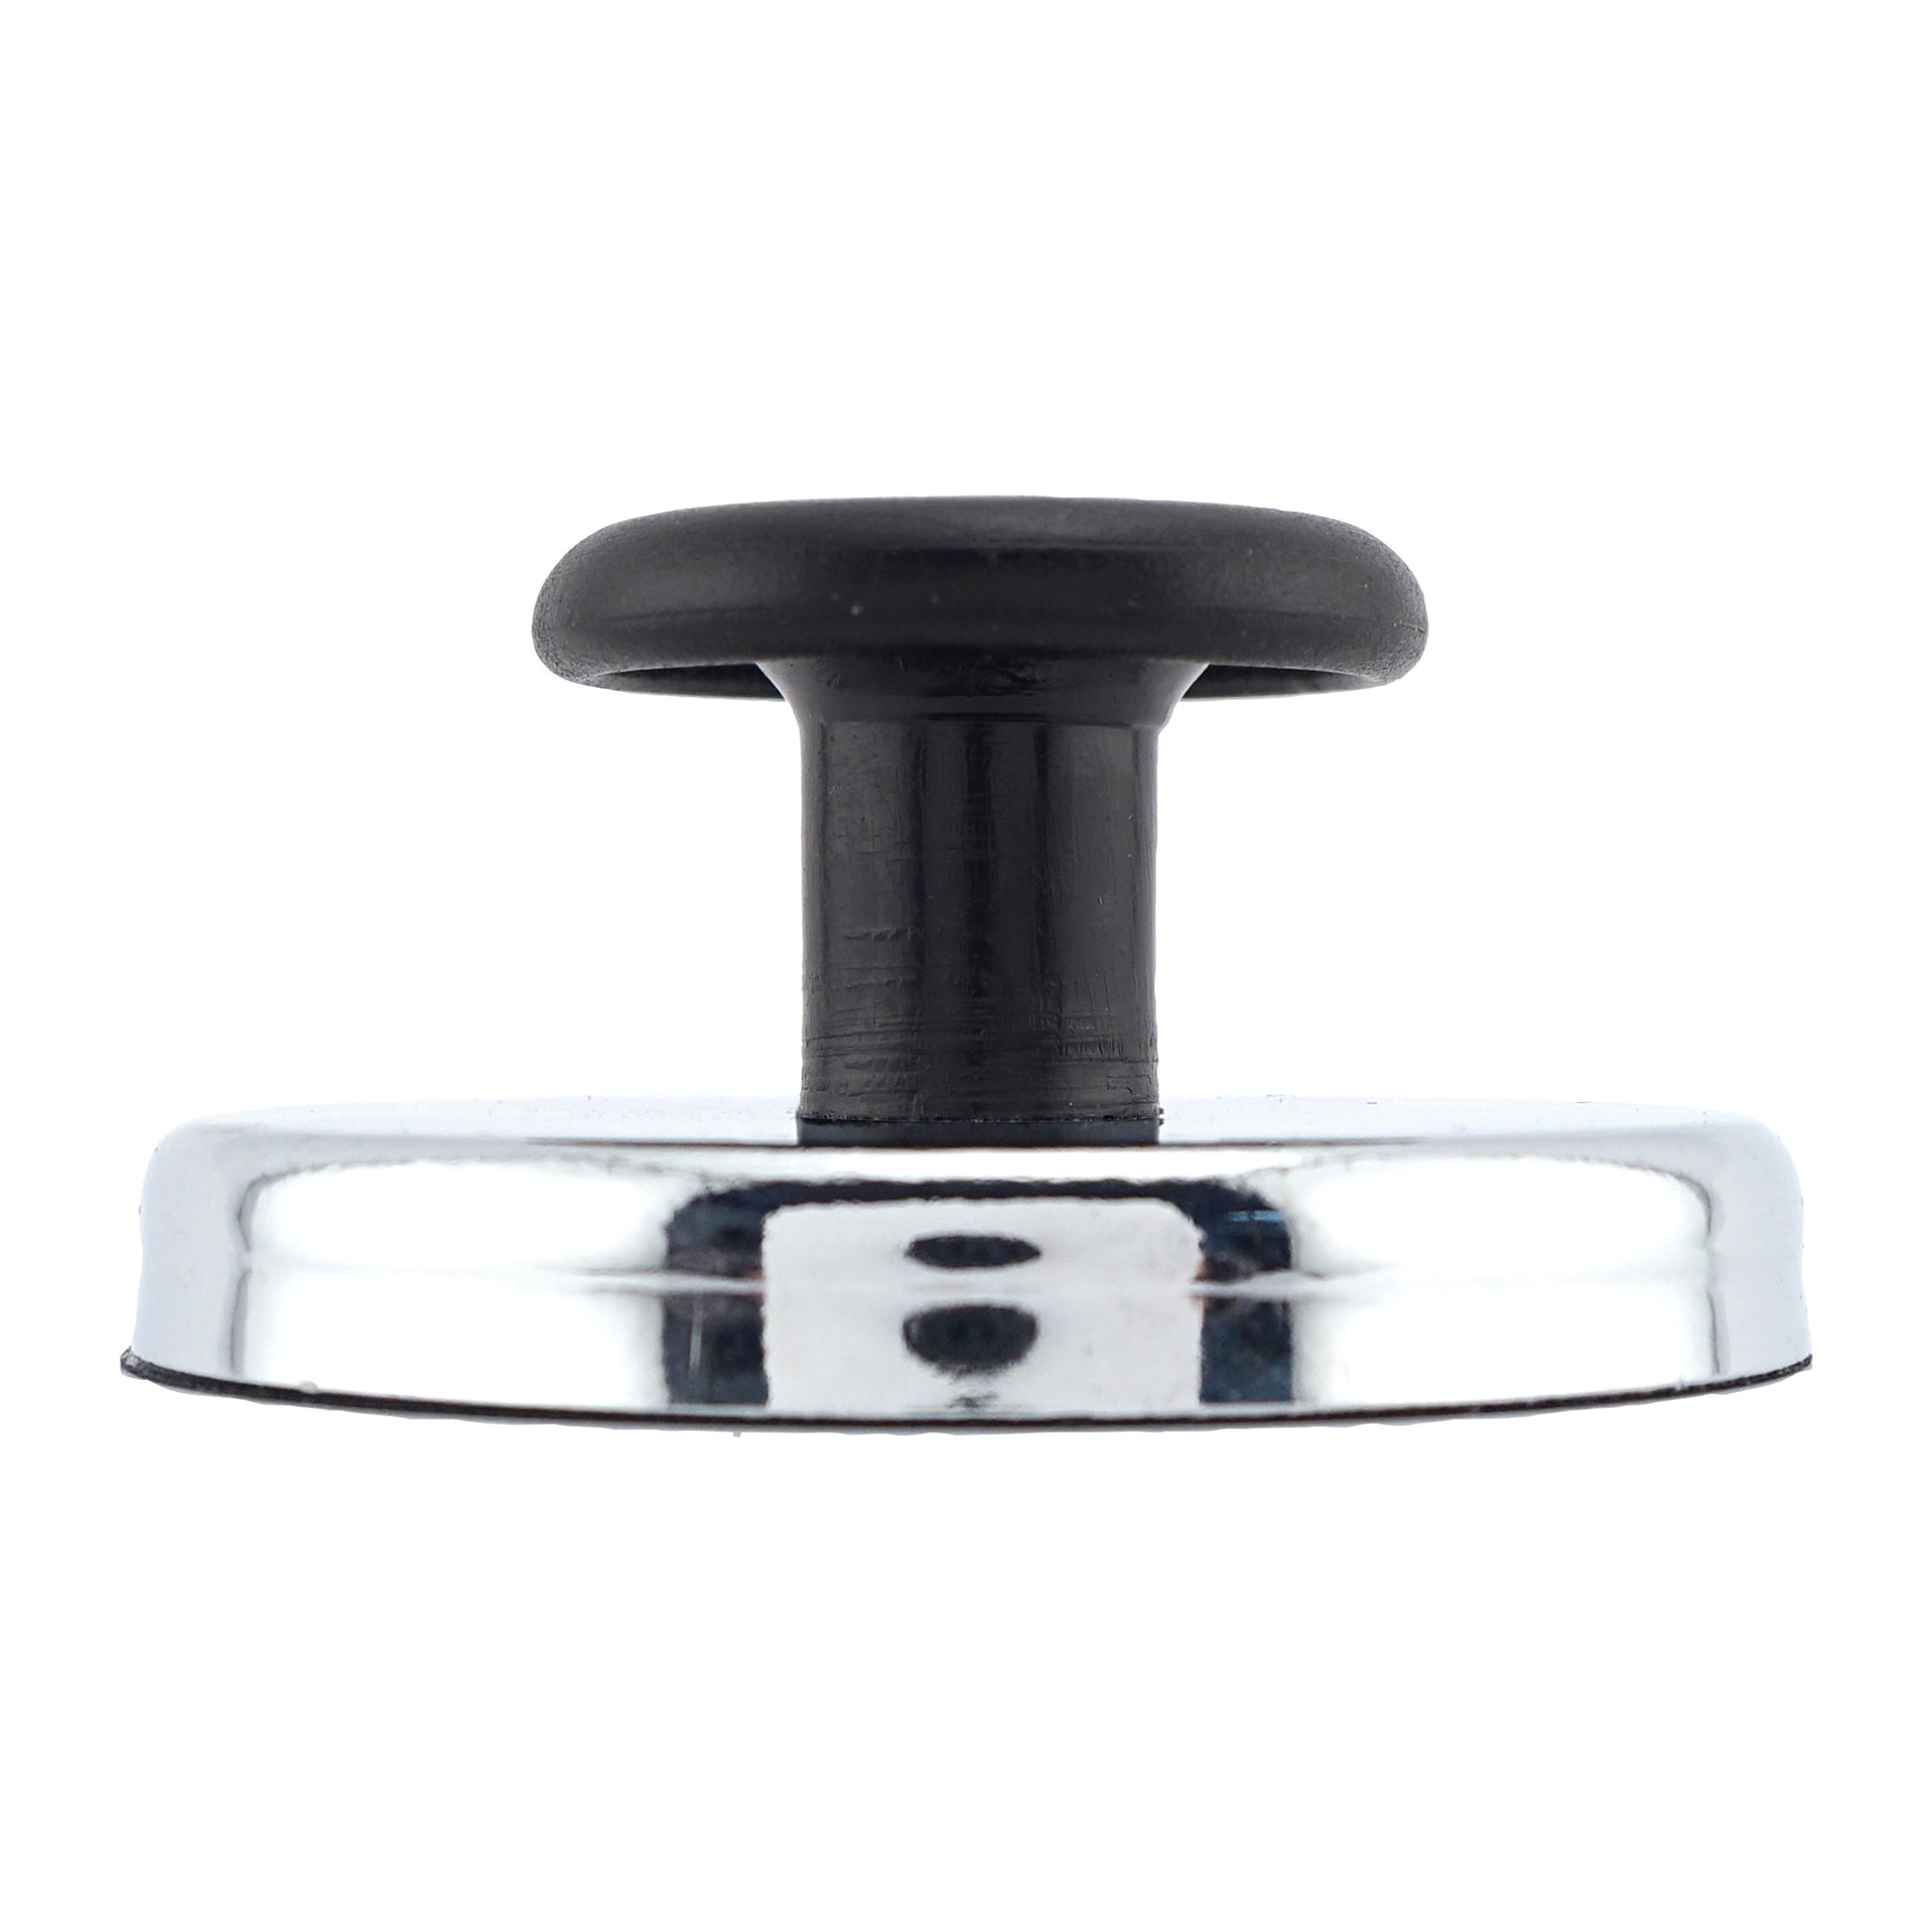 Load image into Gallery viewer, HMKR-50 Ceramic Round Base Magnet with Knob - Top View